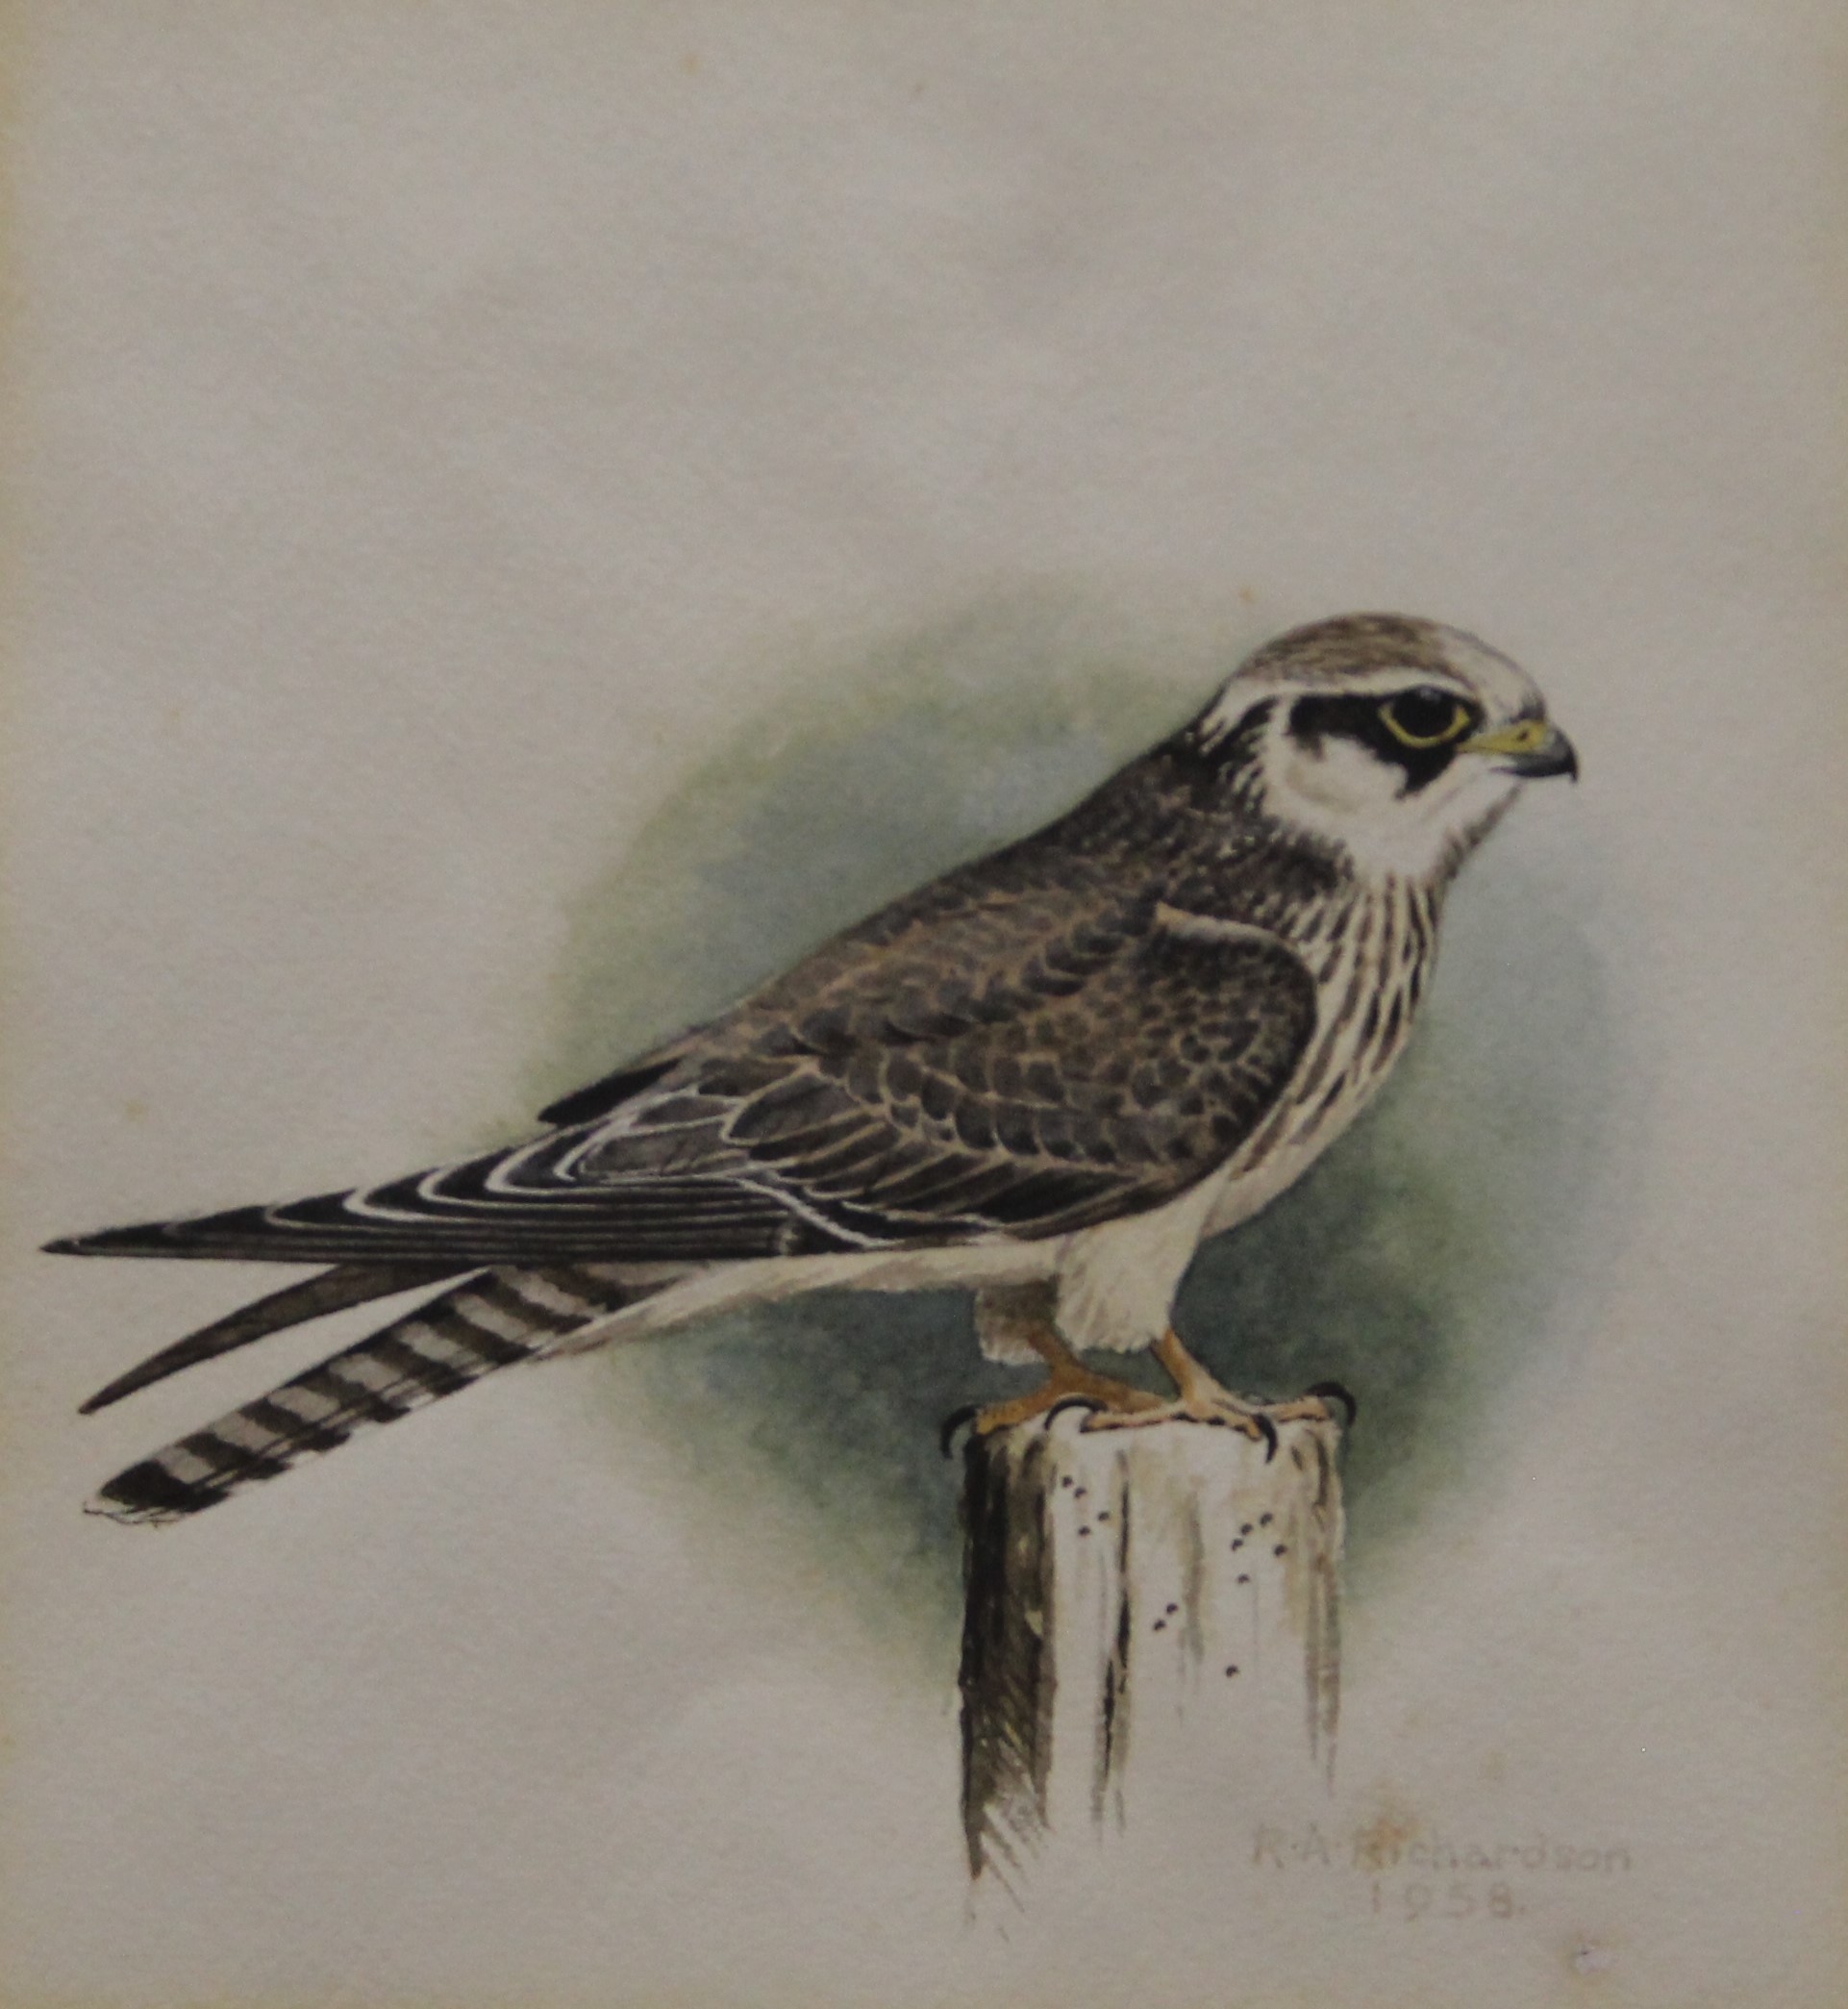 RICHARDSON, RICHARD ALLAN (1922-1977) British (AR), Sparrowhawk, watercolour, signed and dated 1958.